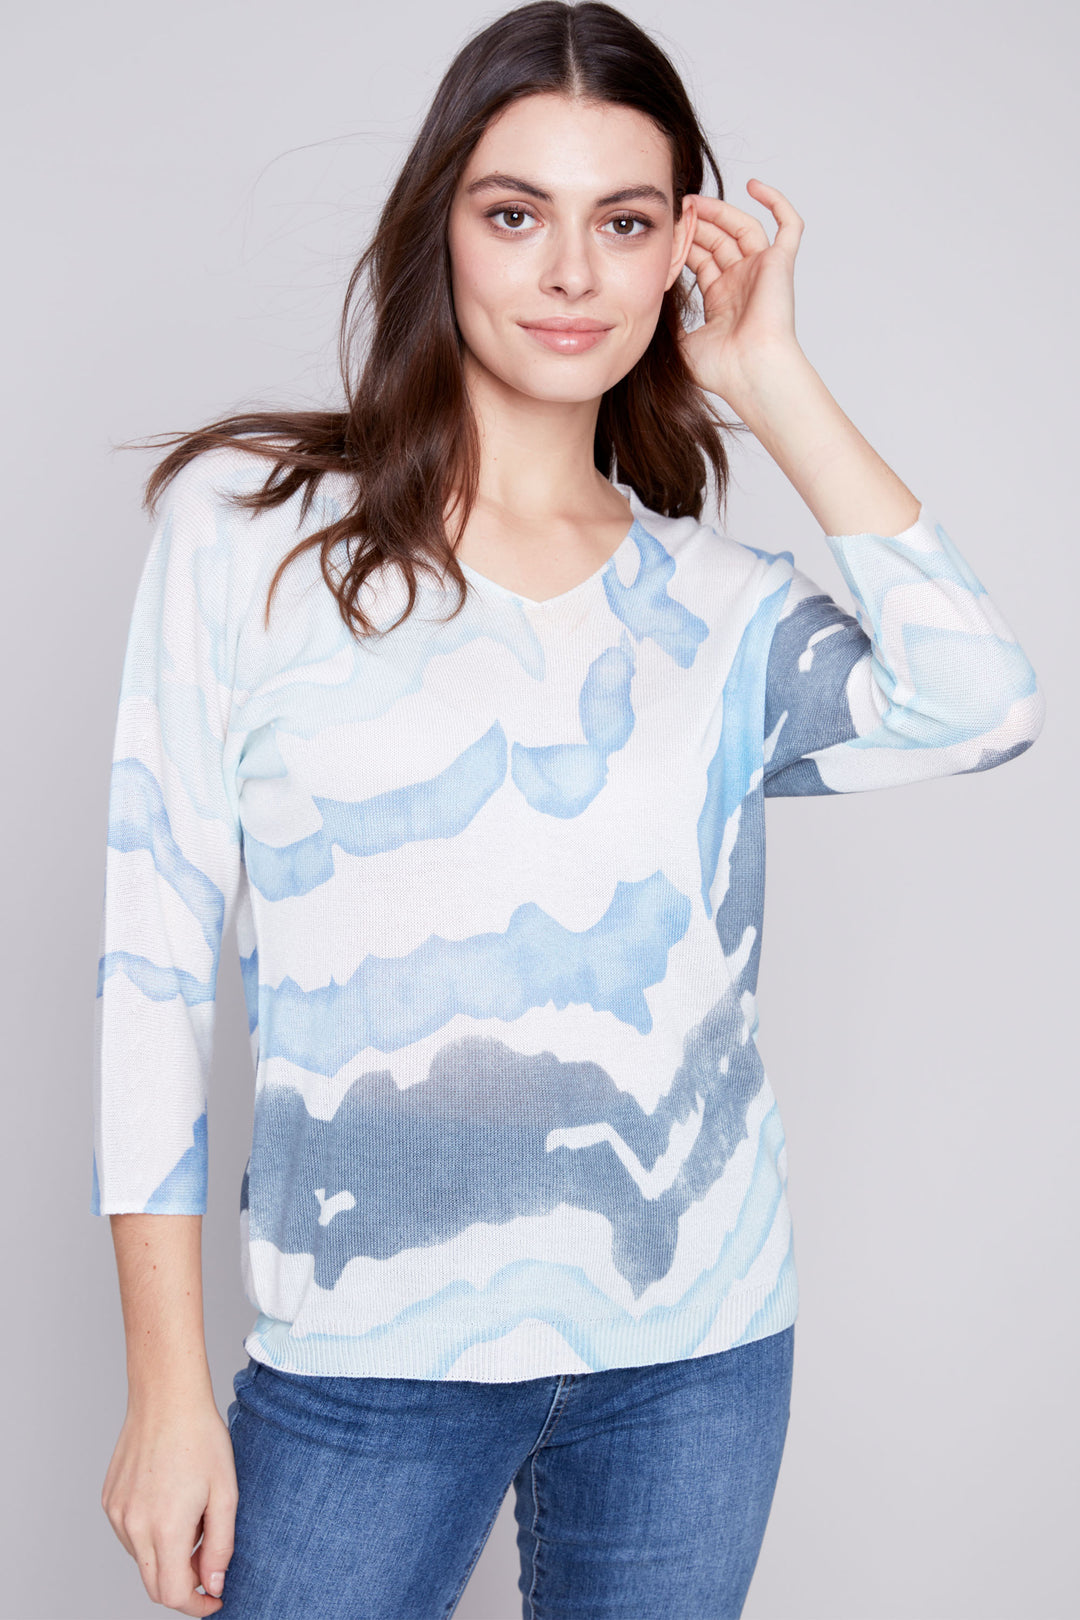 Featuring a soft cut v-neck and classic dolman sleeves, this cool watercolour print will add a playful touch to your wardrobe.